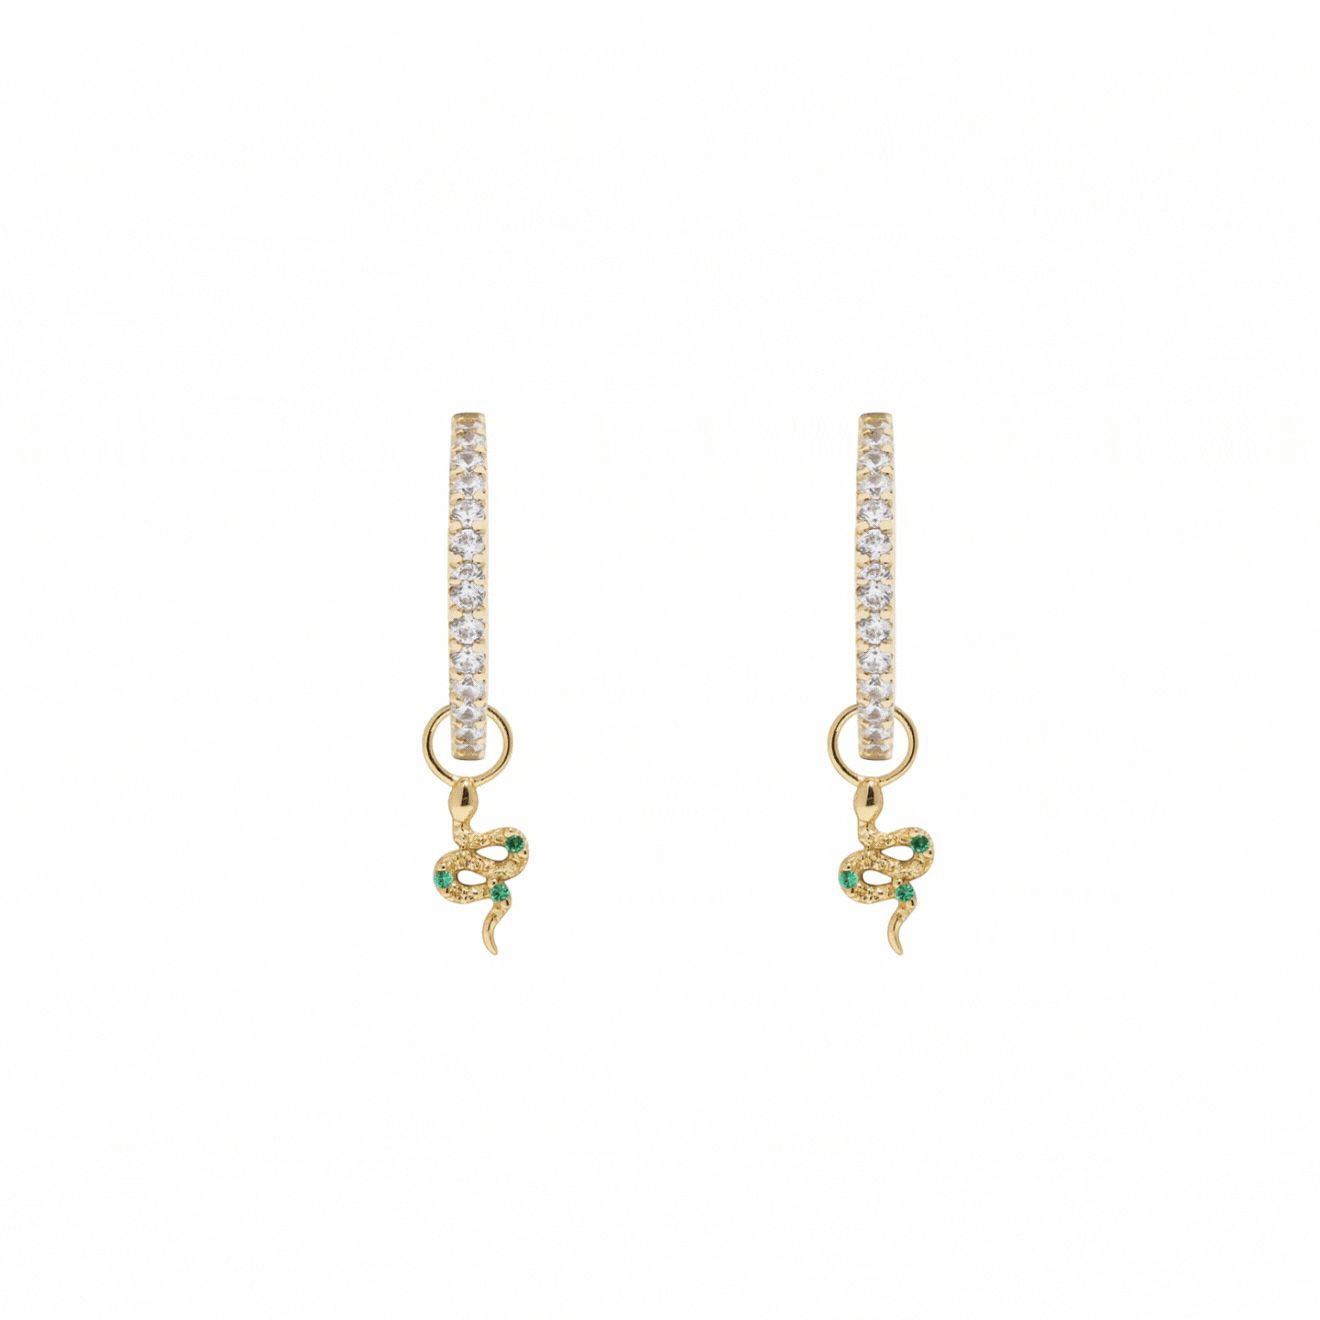 Alma earrings | Five And Two Jewelry